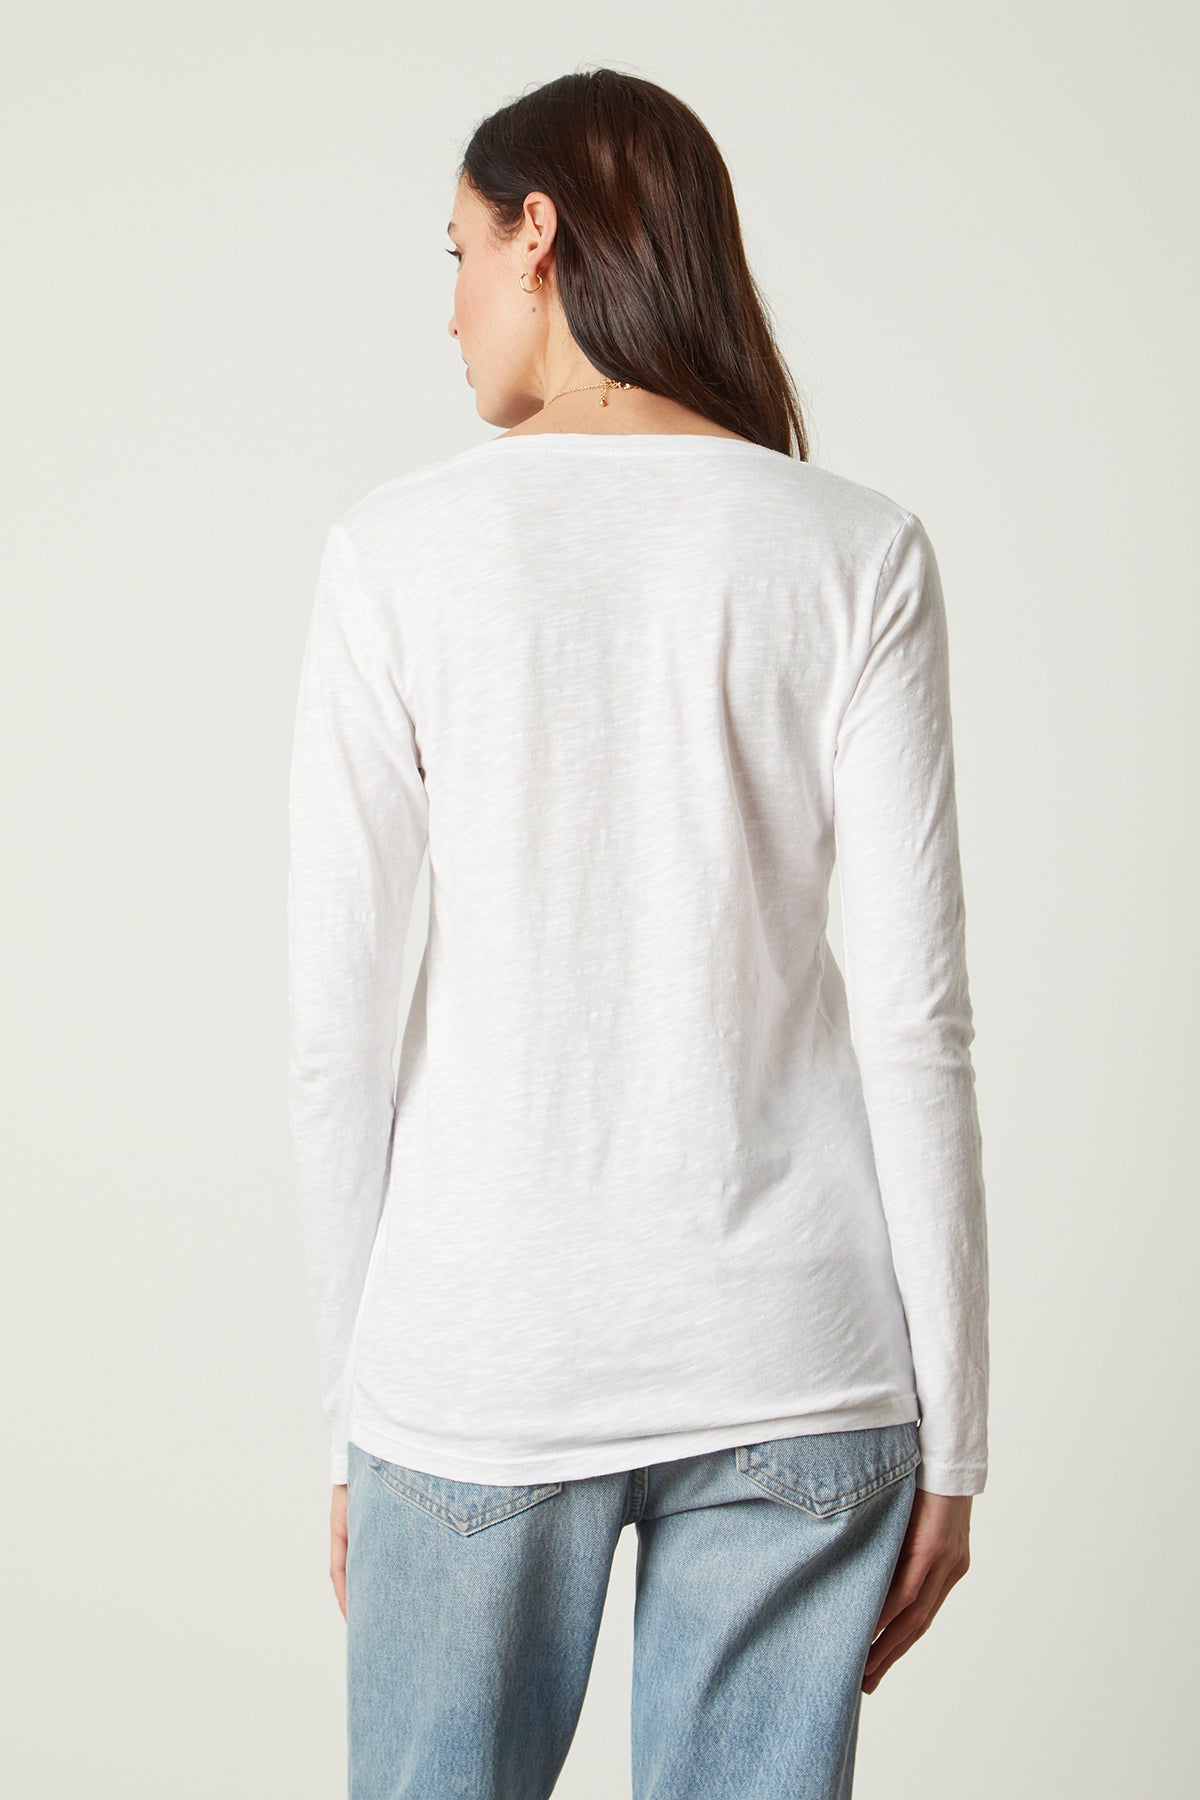   Blaire Original Slub Long Sleeve Tee with V Neck in white with light blue denim back view 